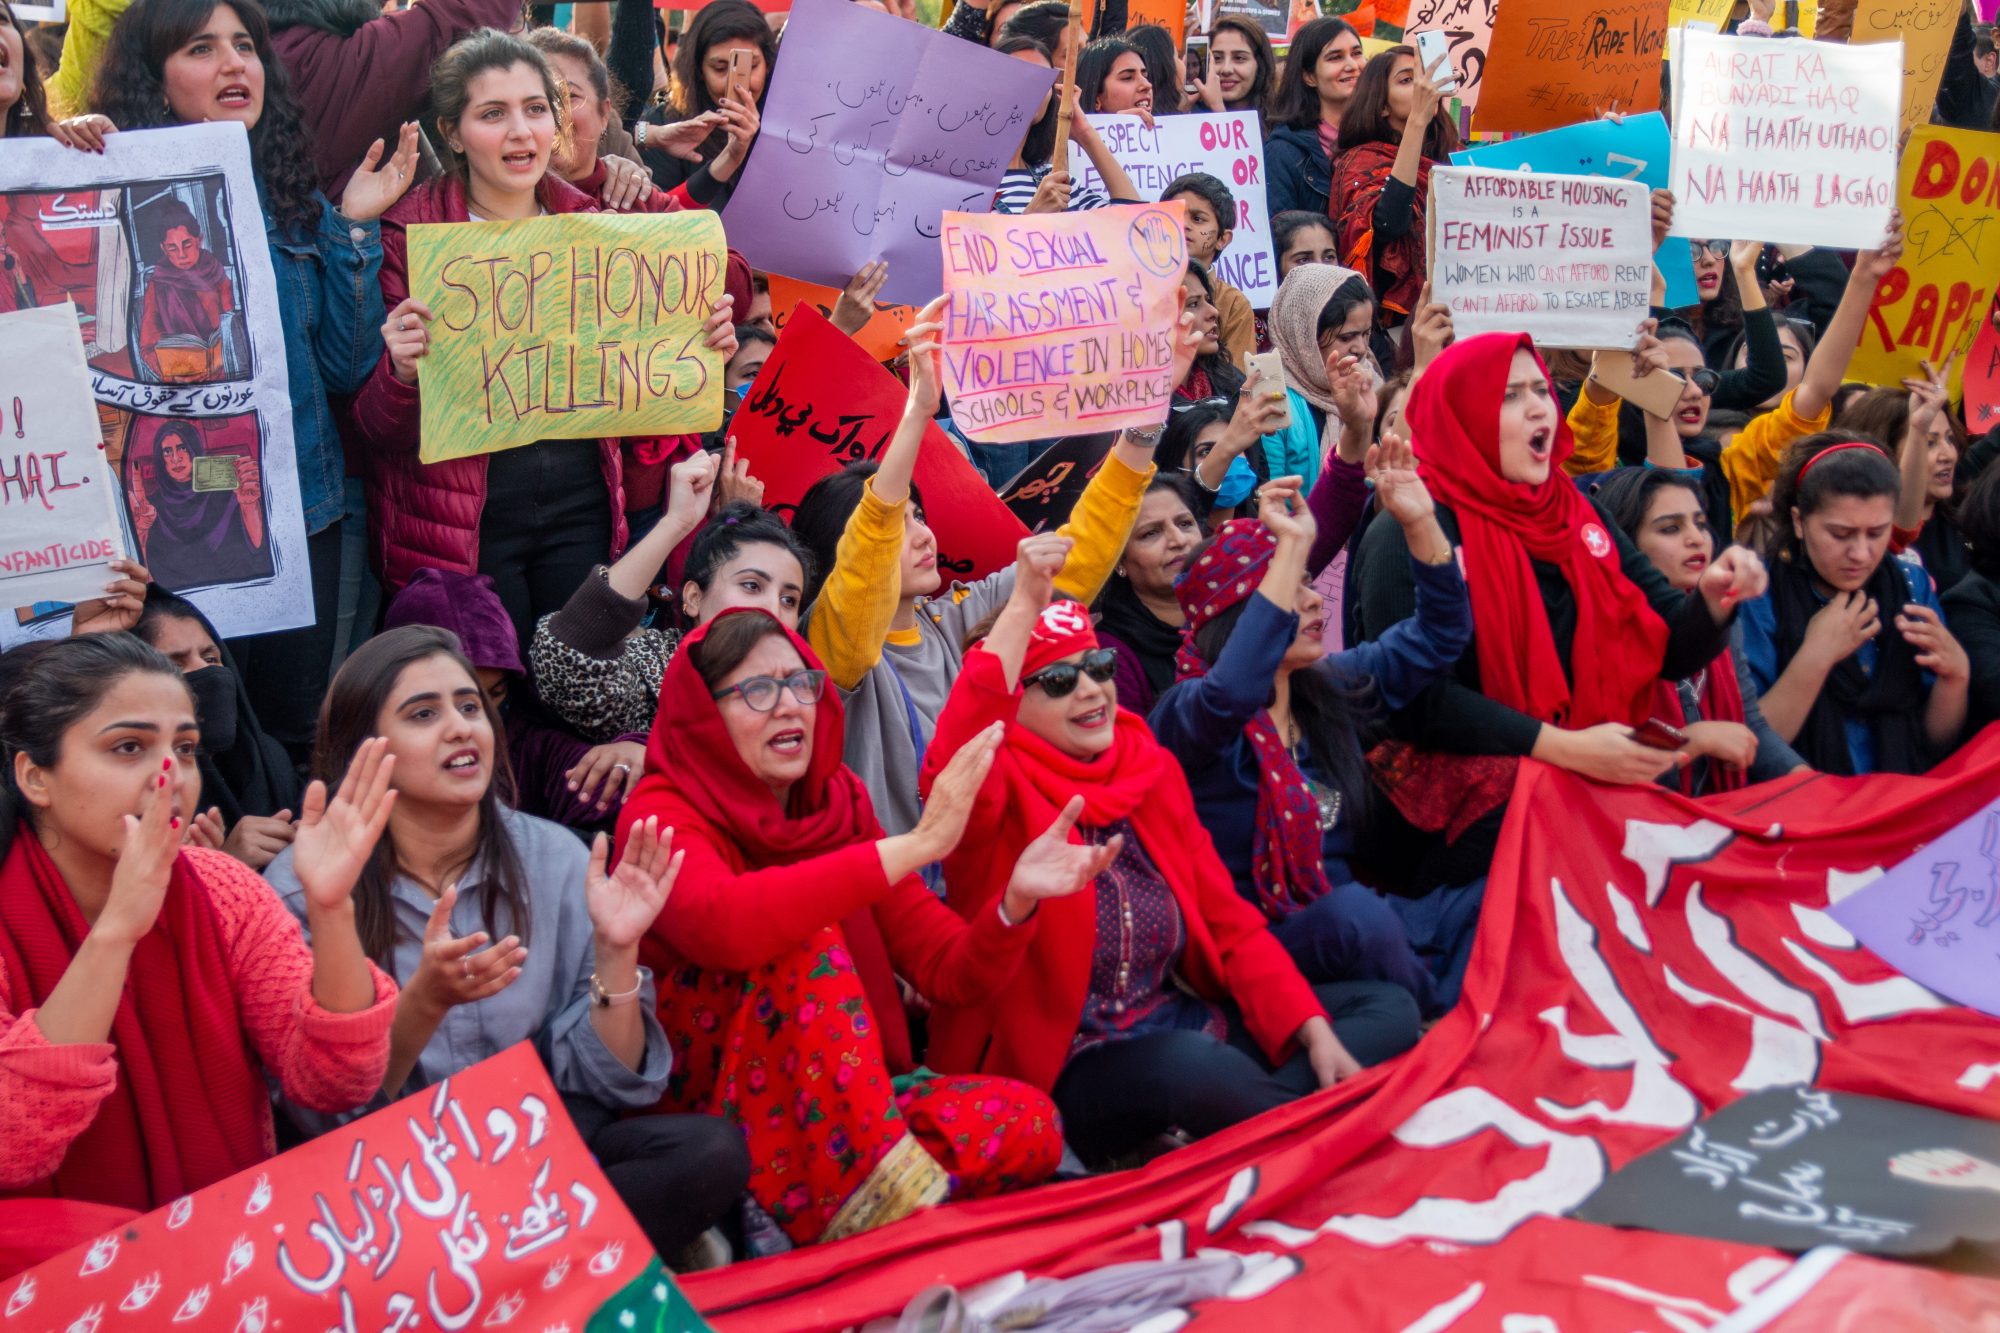 Pakistan's International Women's Day march Inclusive or exclusive